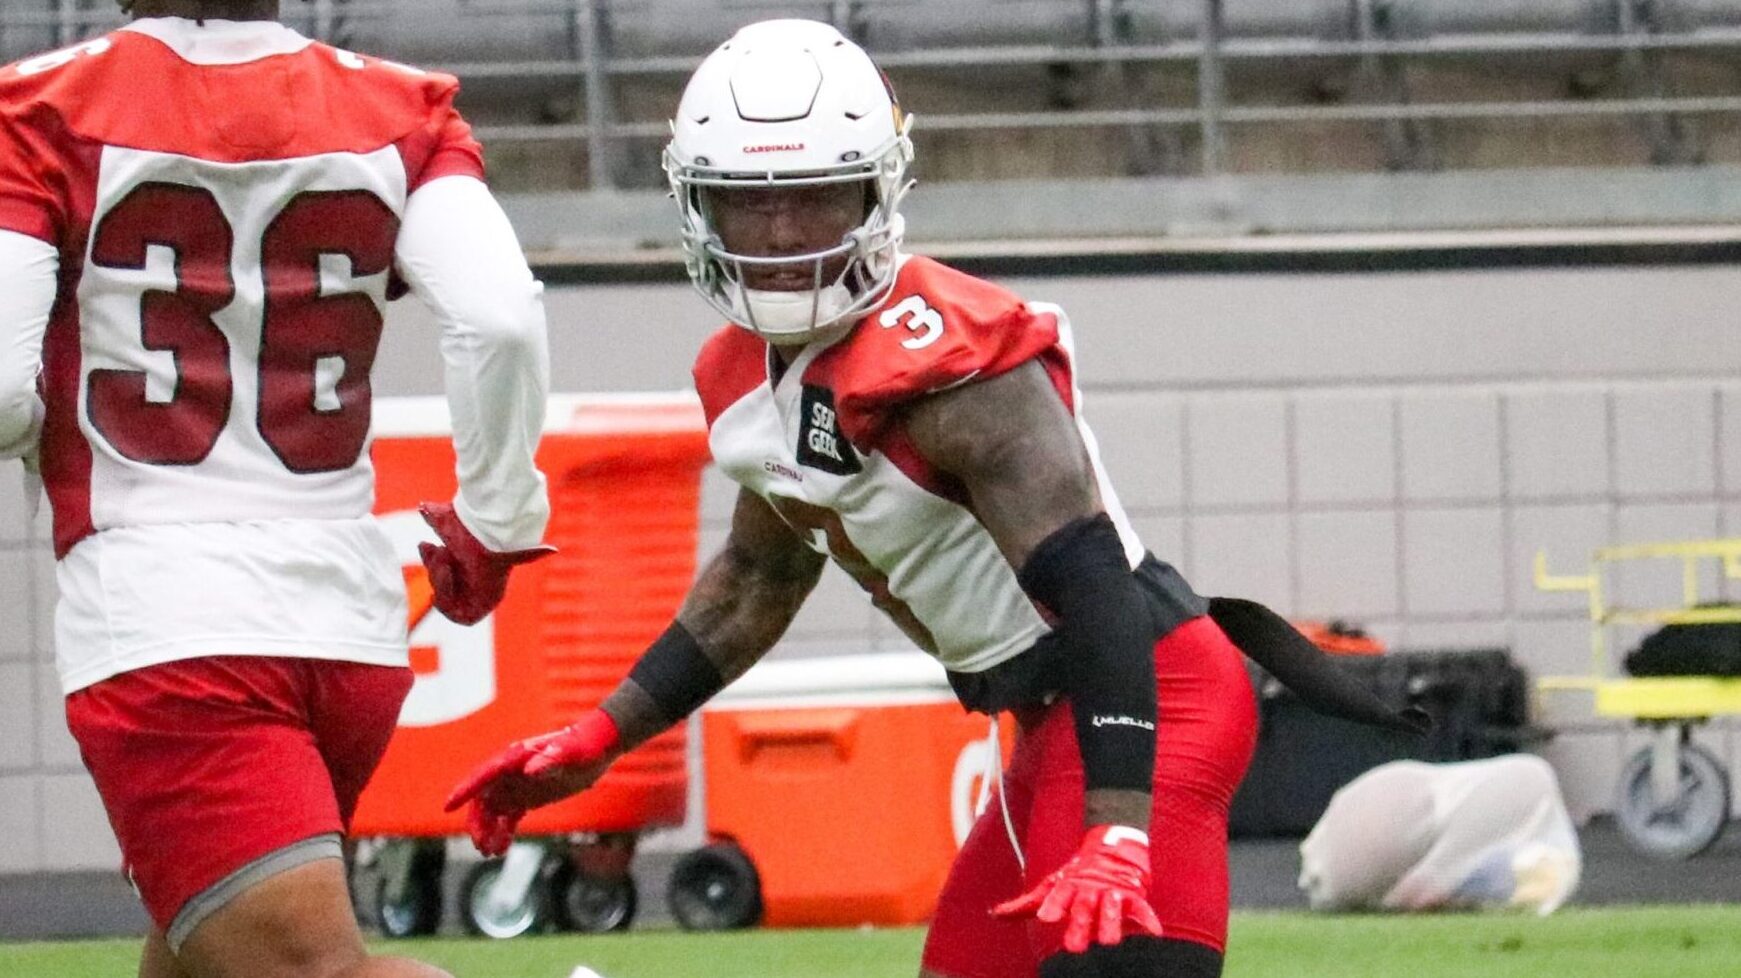 Budda Baker expected to participate '100%' as training camp begins